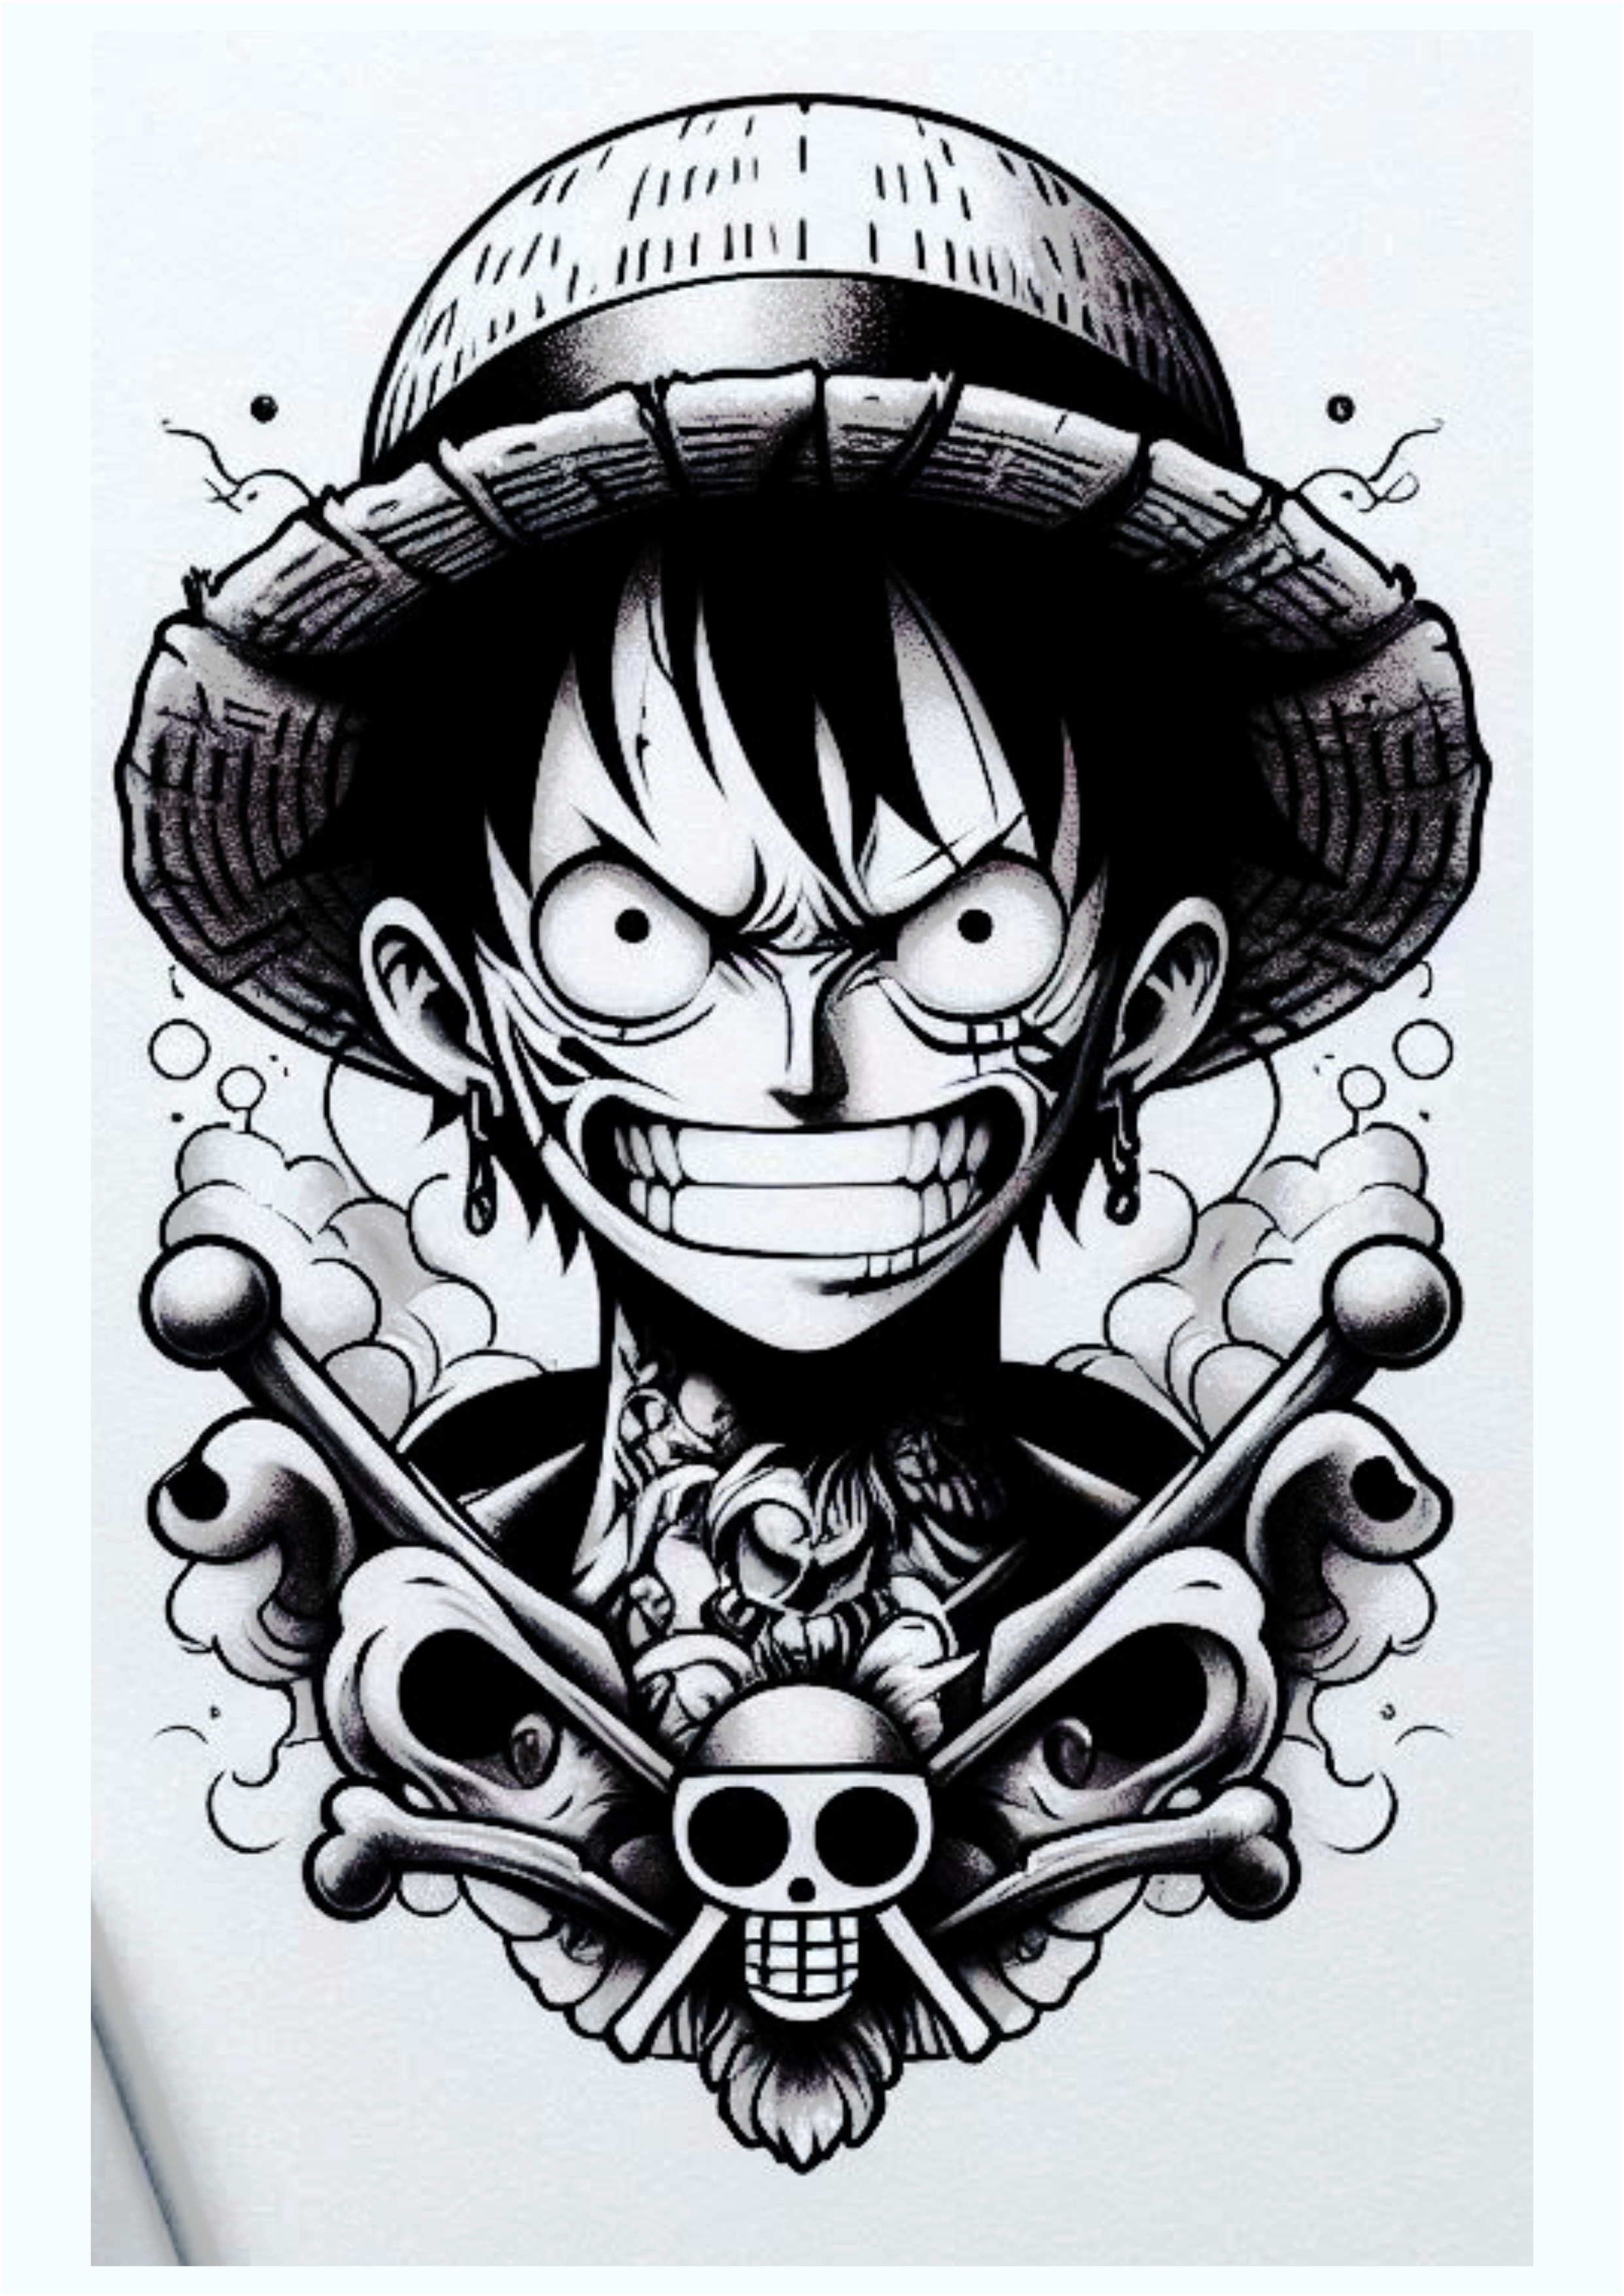 Monochrome One Piece Anime Tattoo Ideas png images